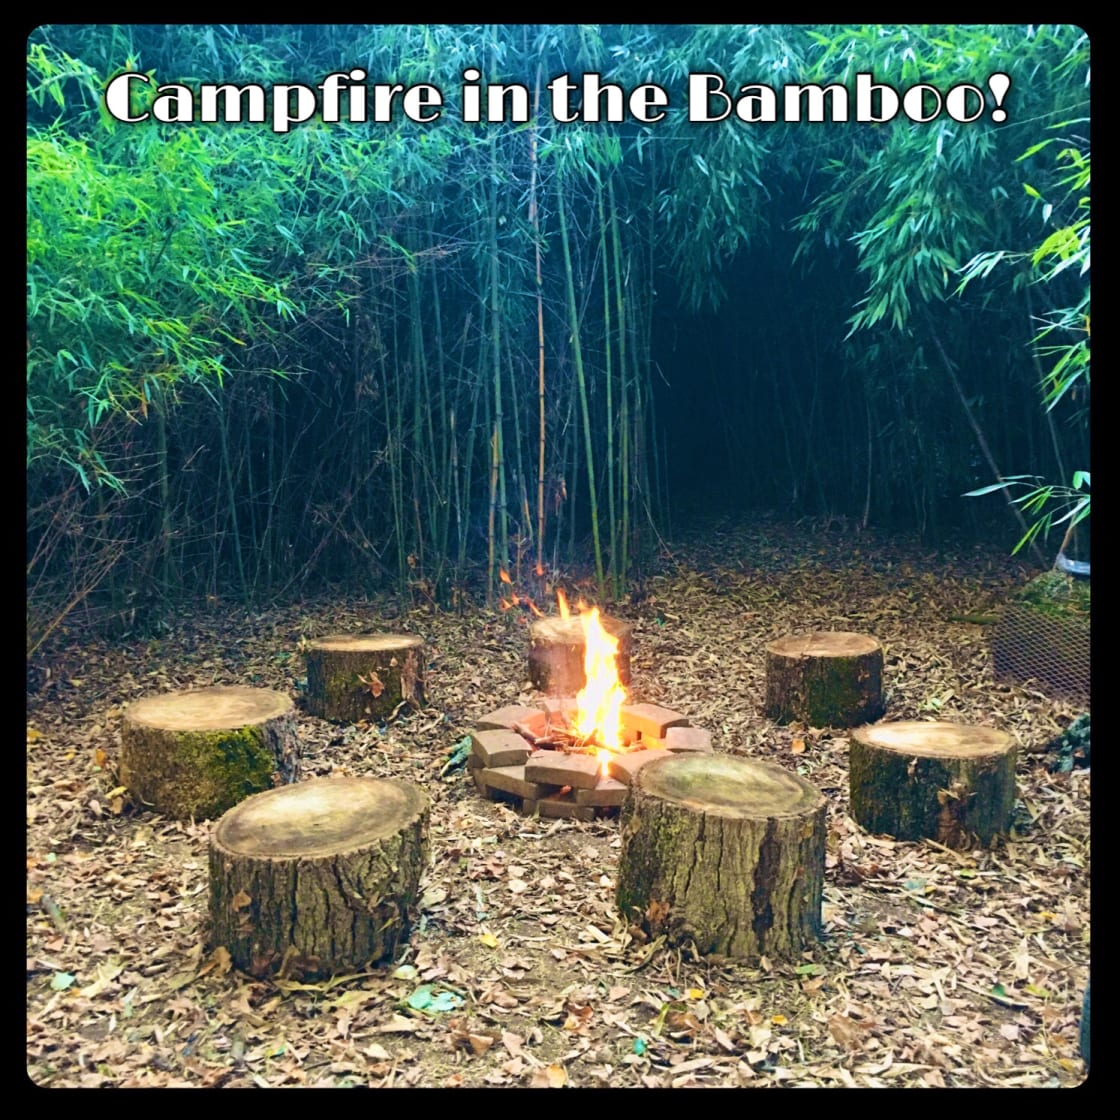 Bamboo Forest Campsite